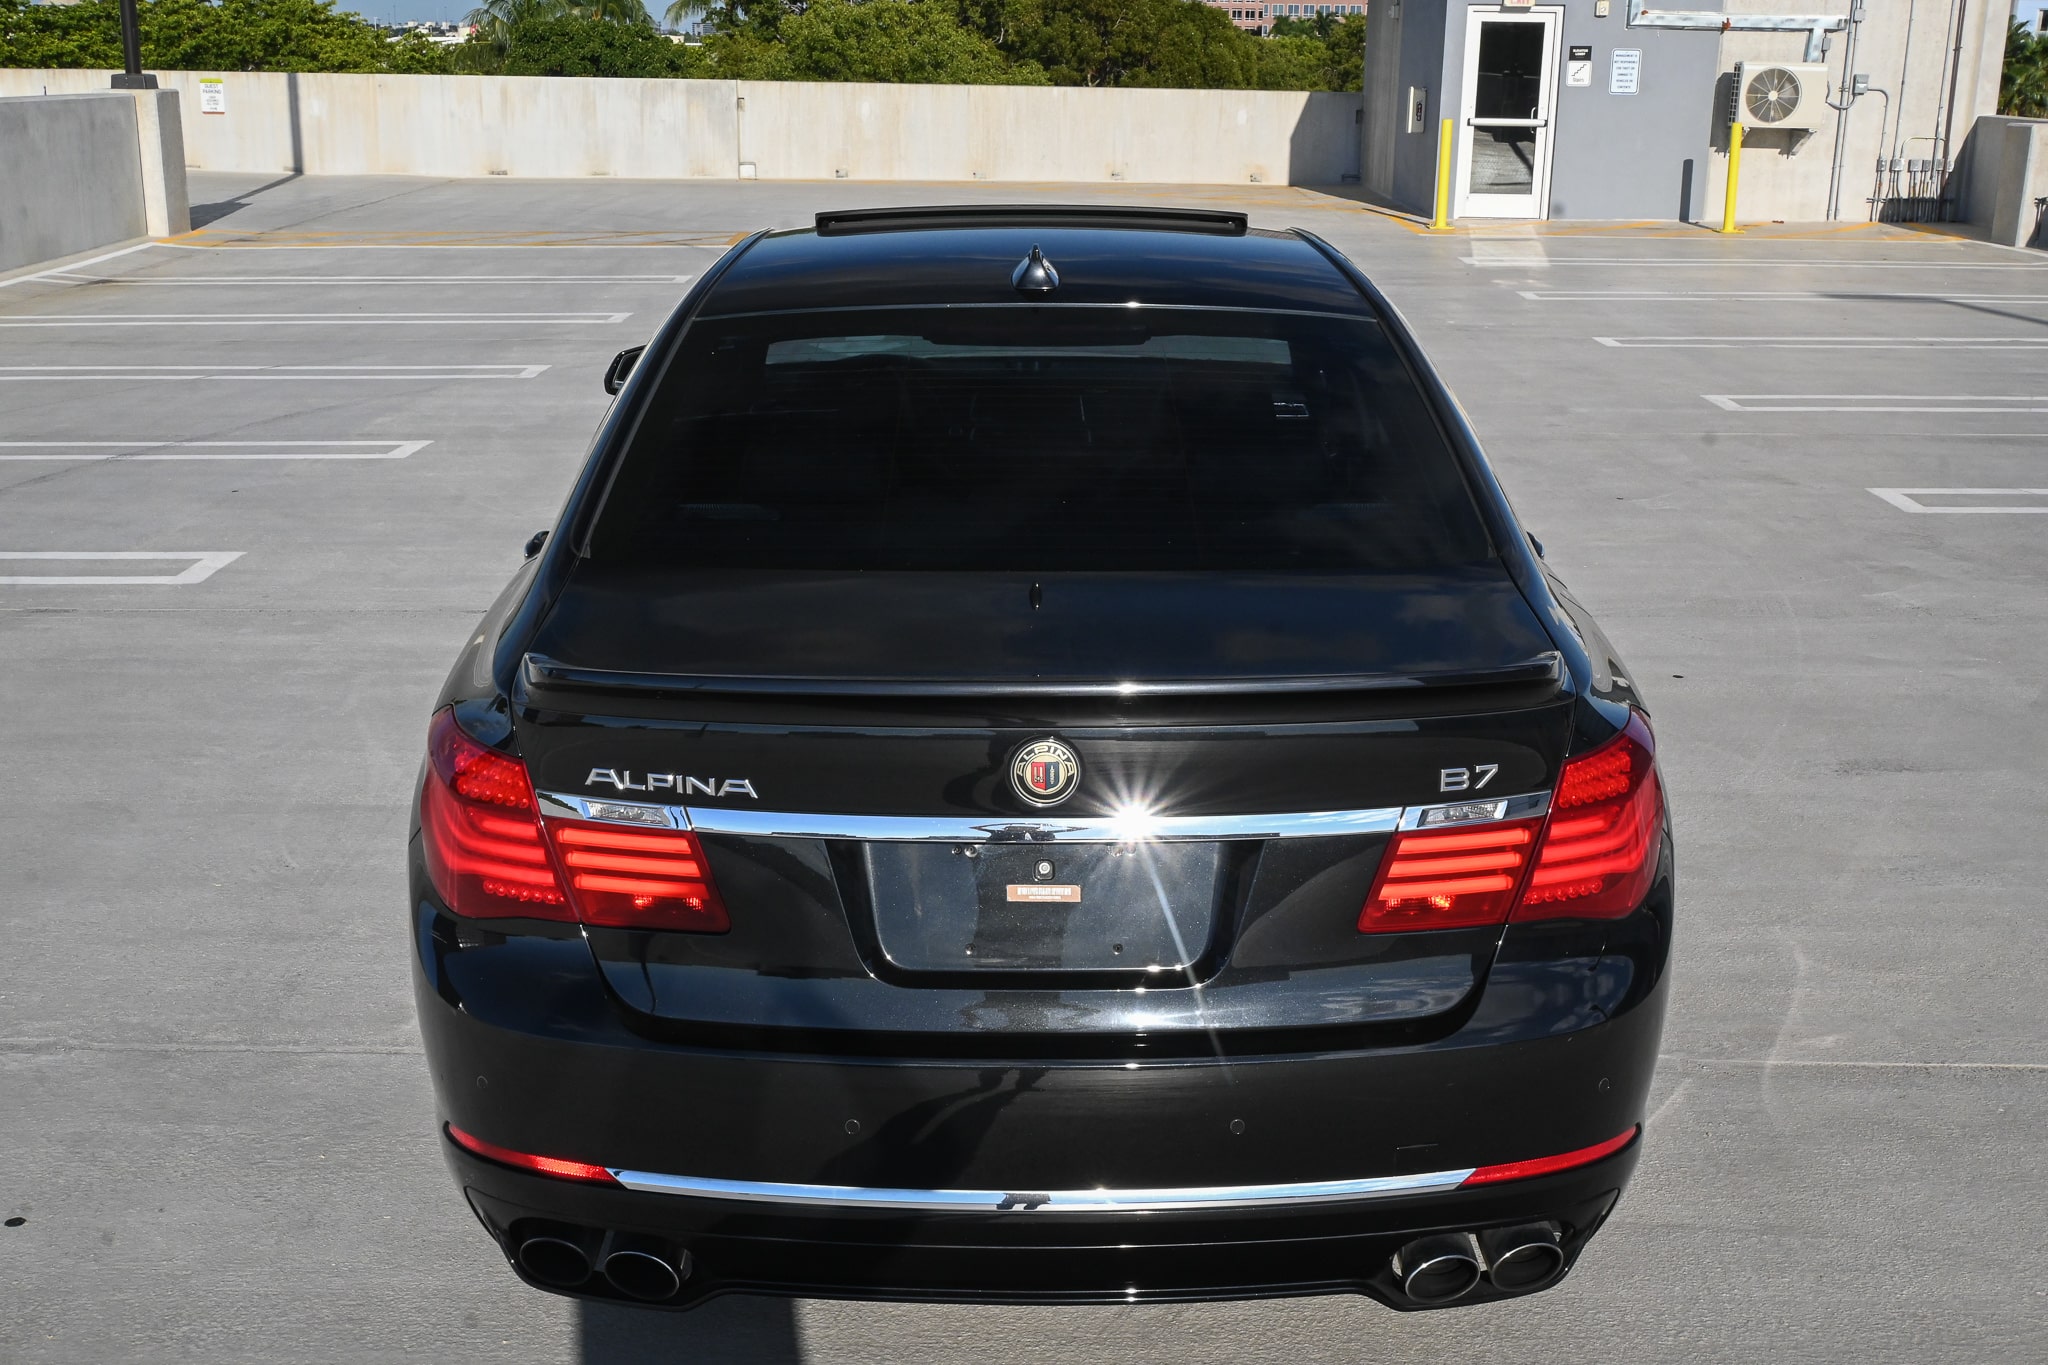 2013 Alpina B7 Rare 1 of 1740 US cars | Only 53000 miles | Unmodified | California Car | 540hp